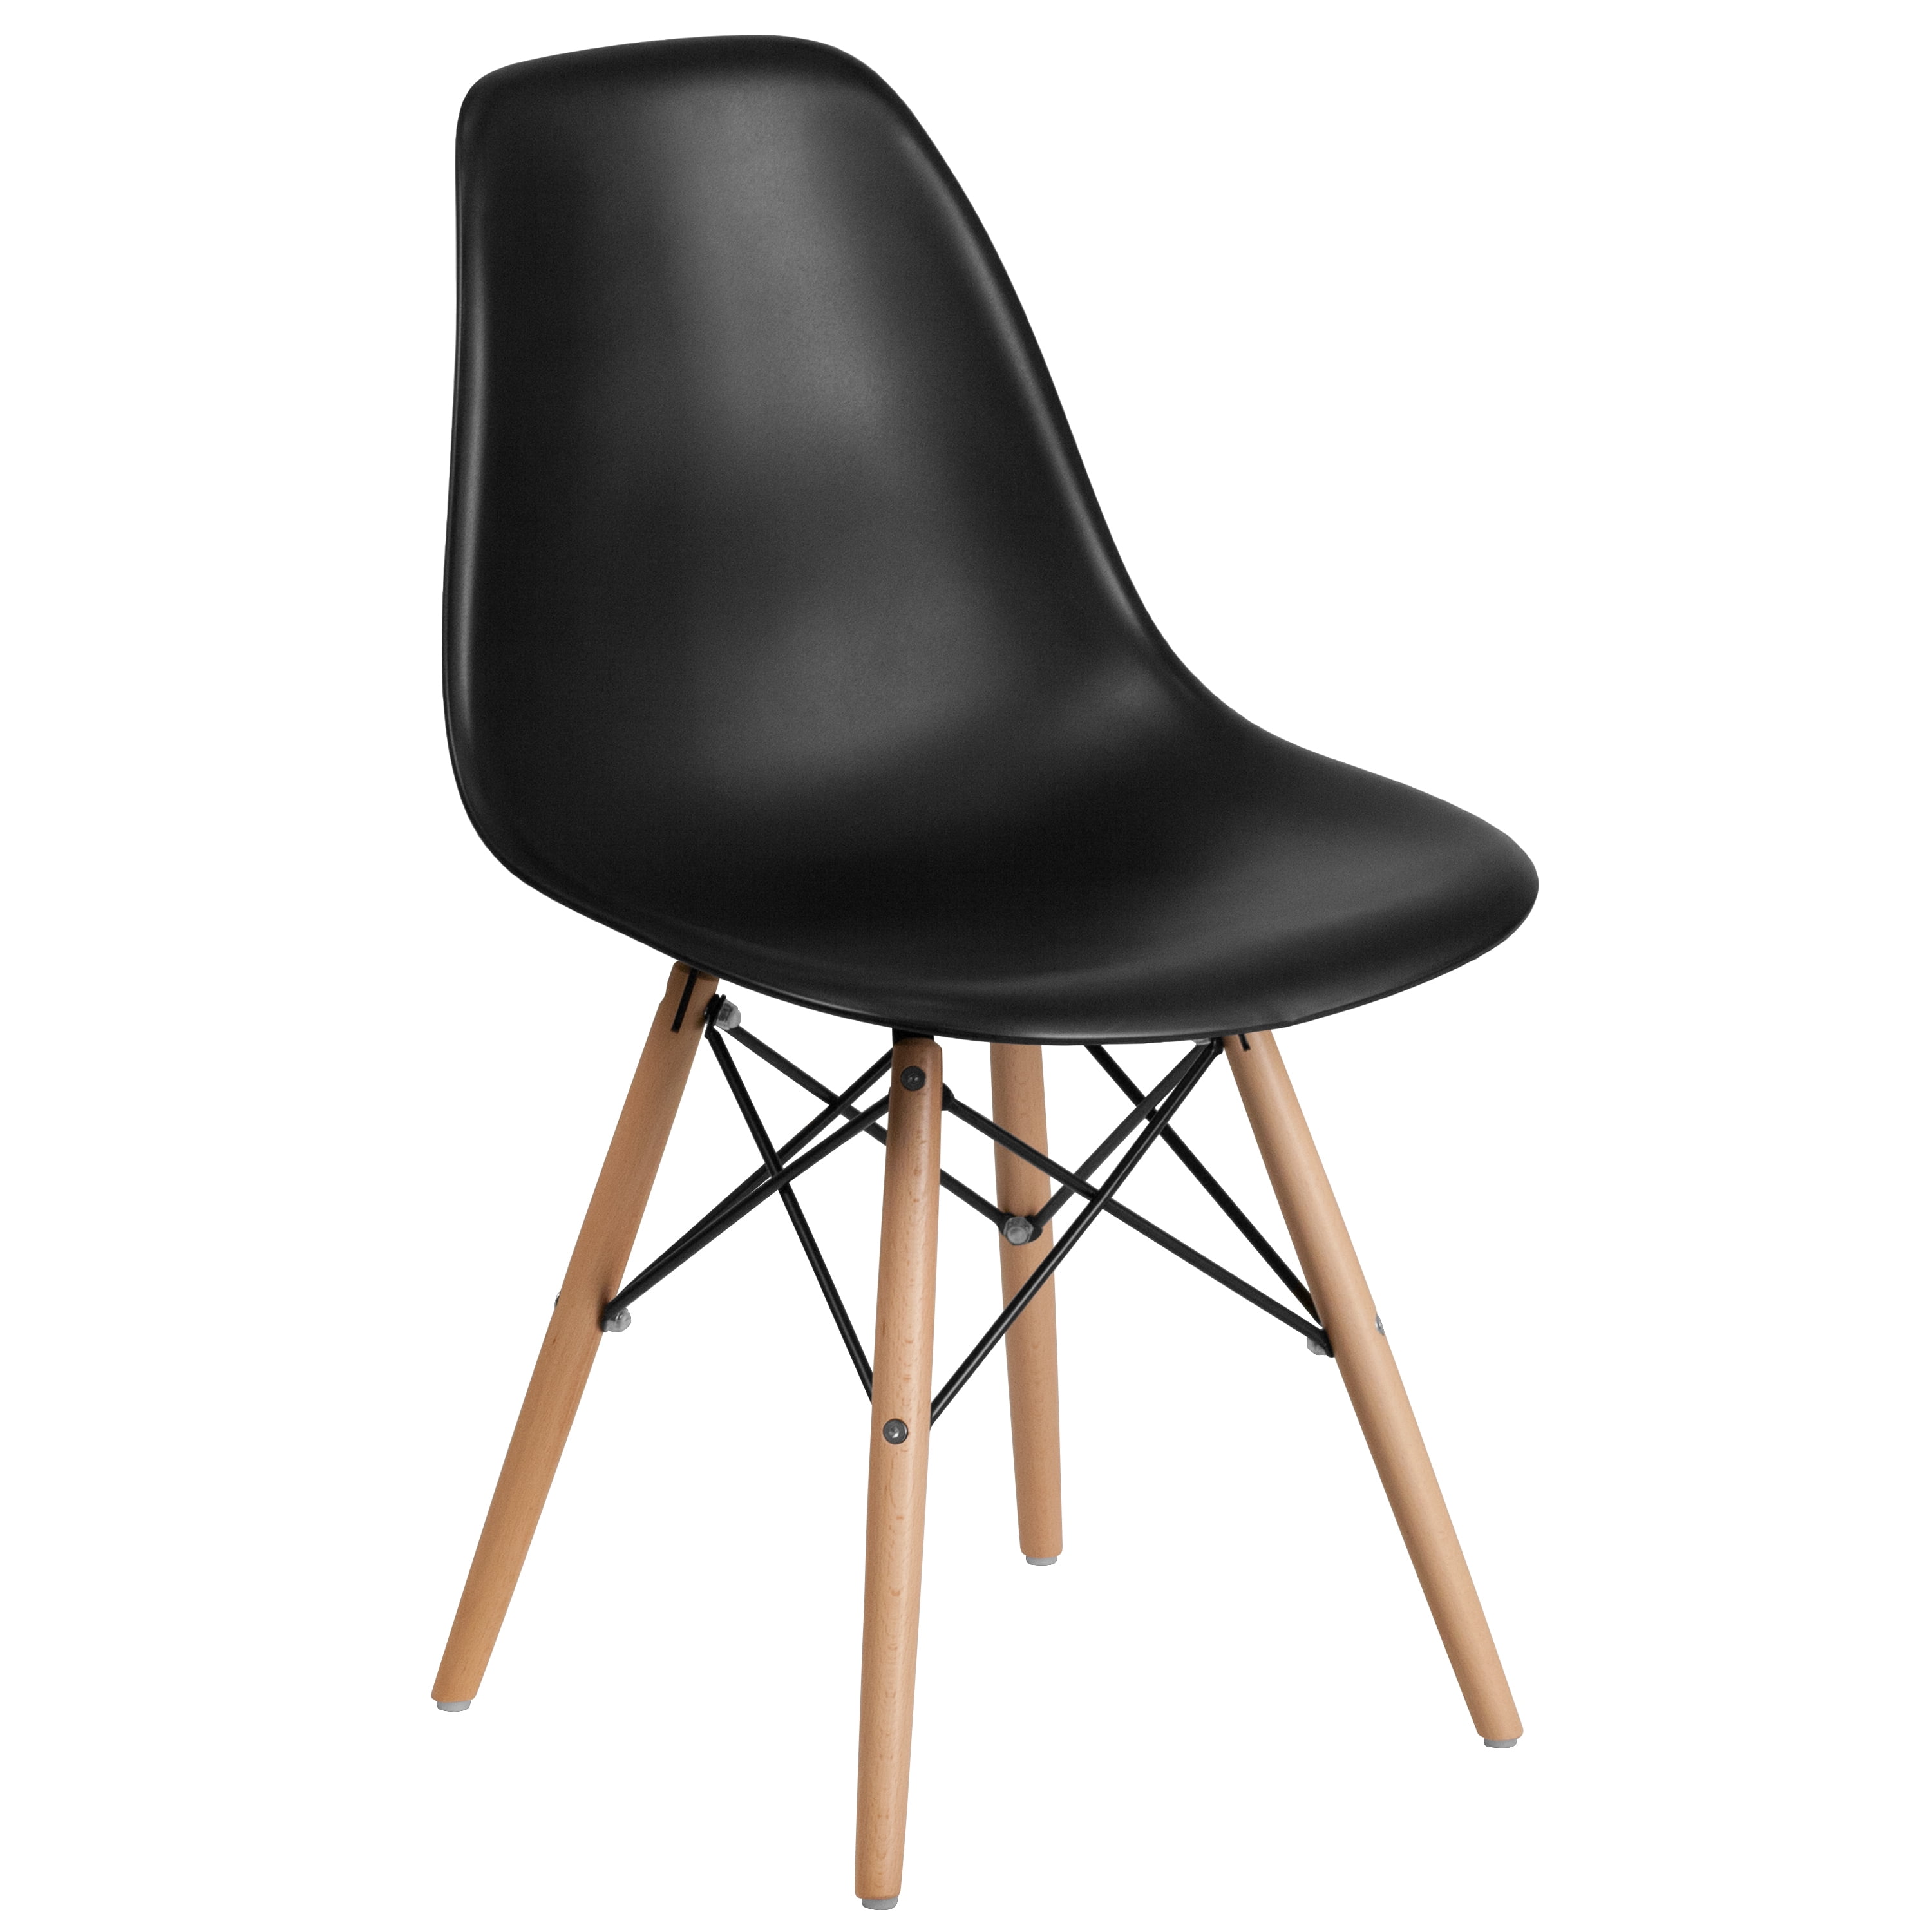 Black Plastic Chair With Wooden Legs, Black Plastic Chairs With Wooden Legs